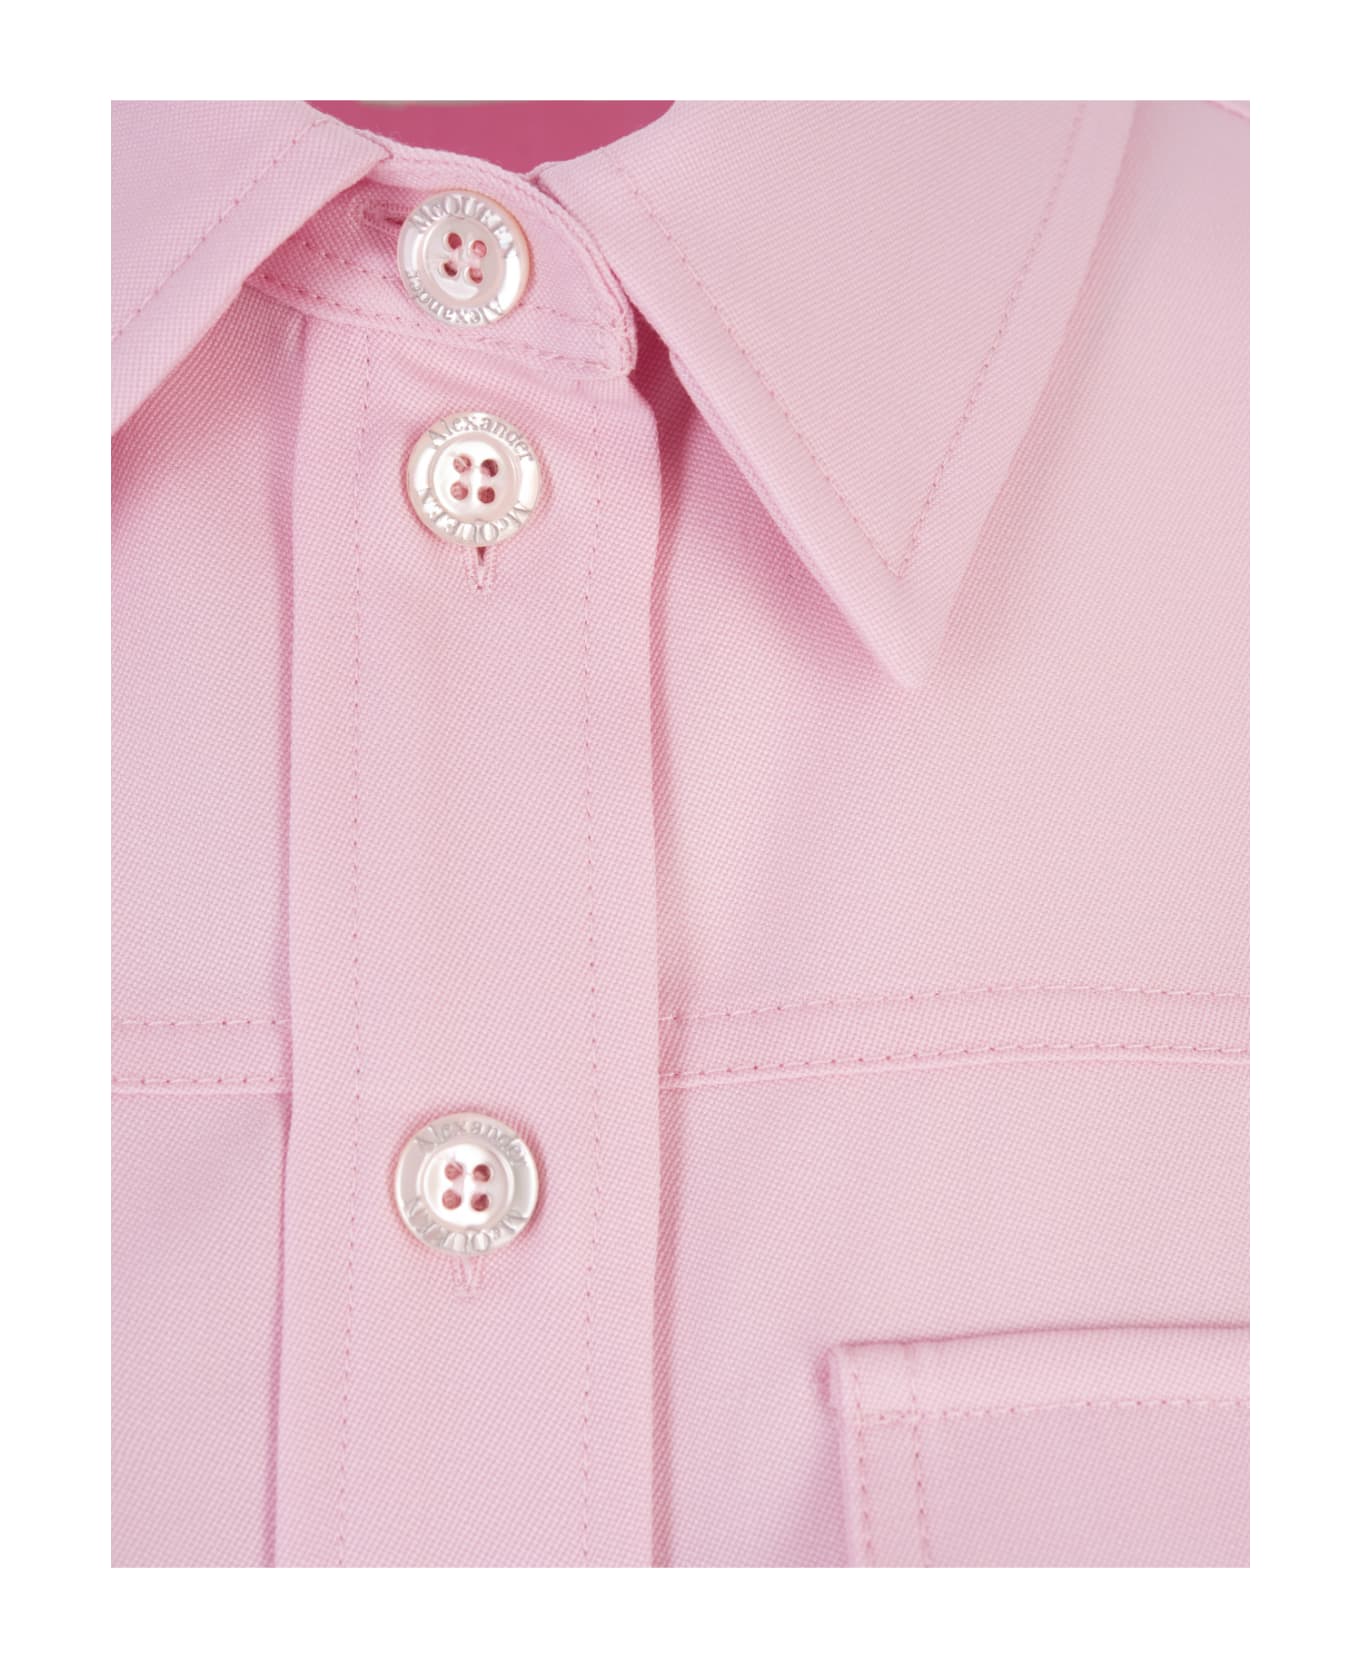 Alexander McQueen Shirt With Military Pockets In Light Pink - Pink